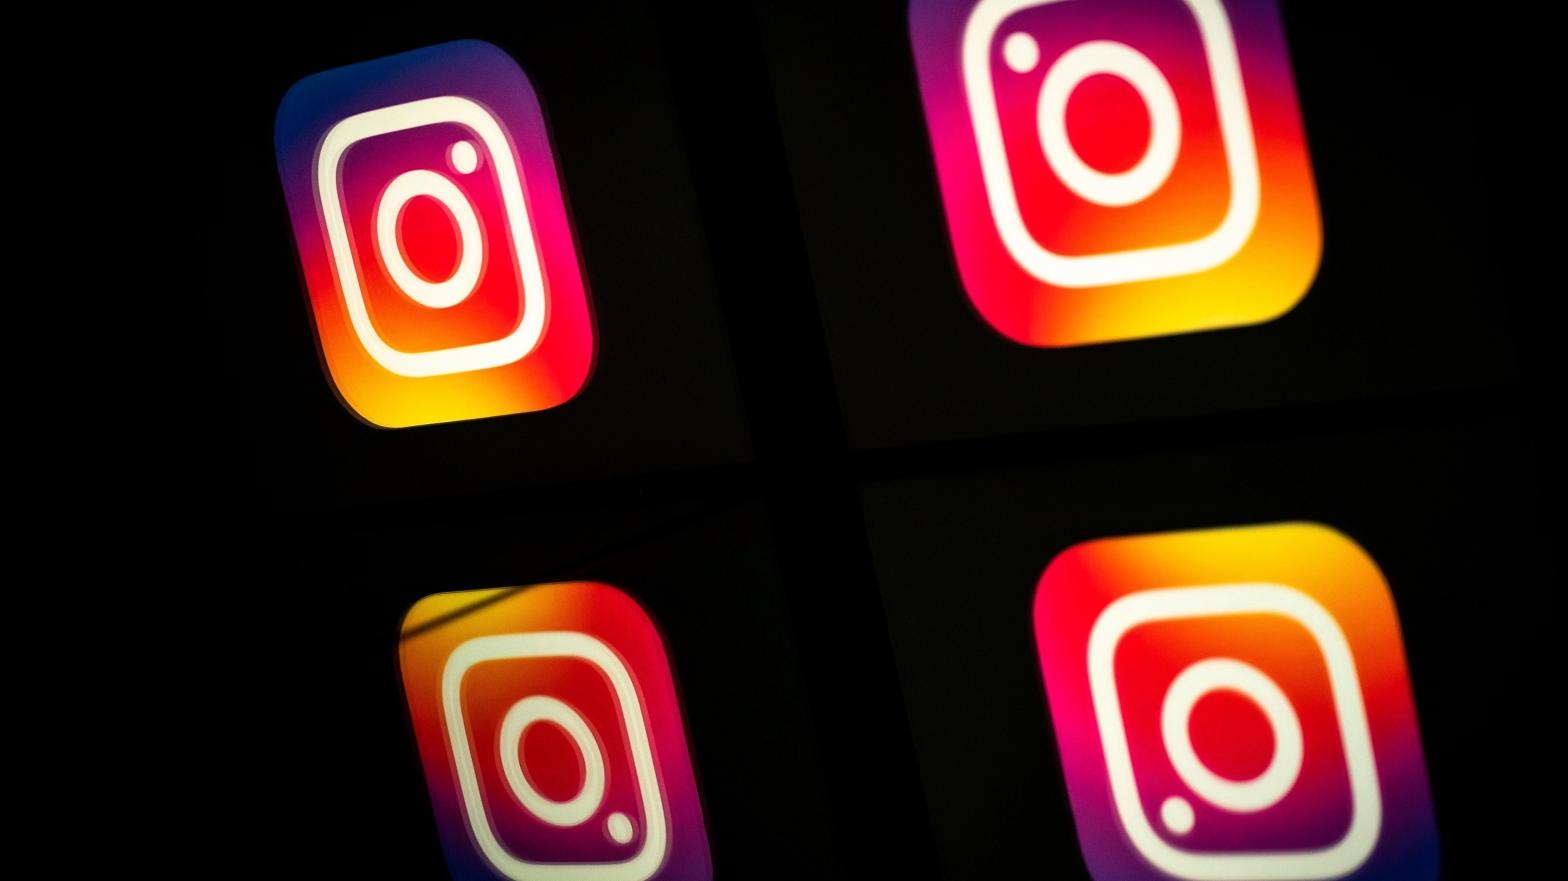 In an earnings call, Meta CEO Mark Zuckerberg said that AI recommended content from accounts users don't follow would make up 30% of Instagram and Facebook feeds in 2023. (Image: Lionel Bonaventure / AFP, Getty Images)